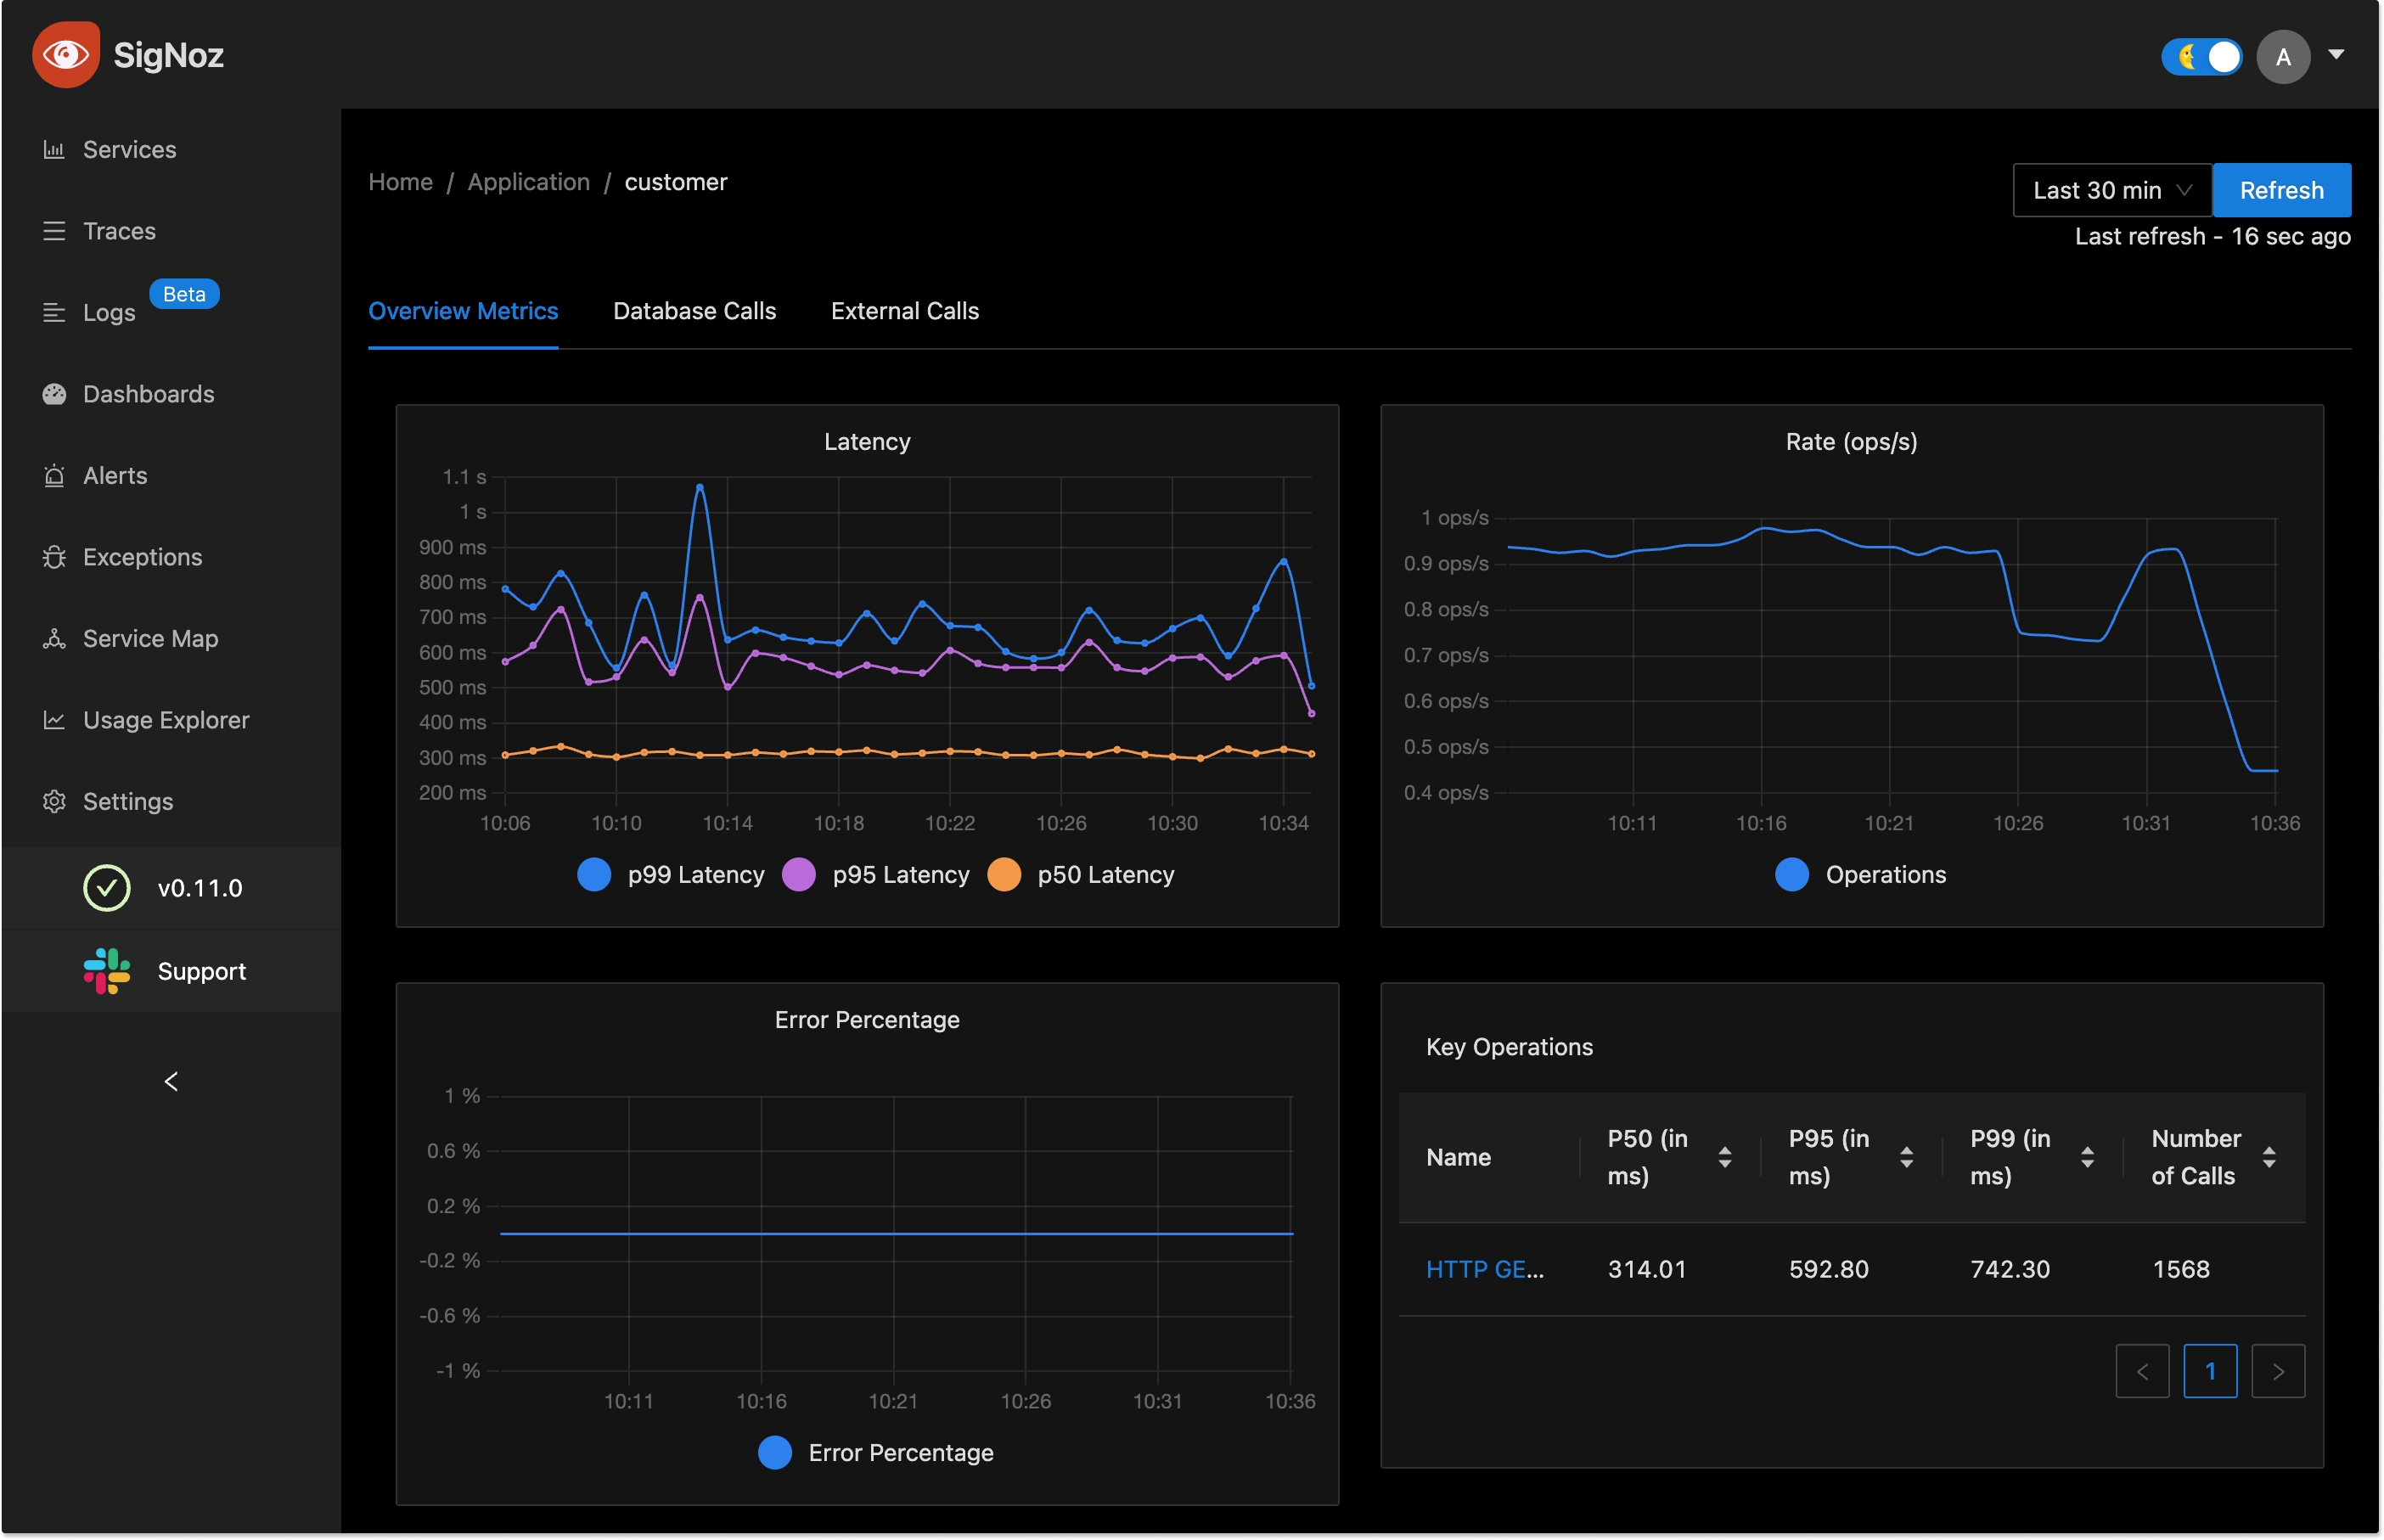 SigNoz dashboard showing the popular RED metrics for application performance monitoring.